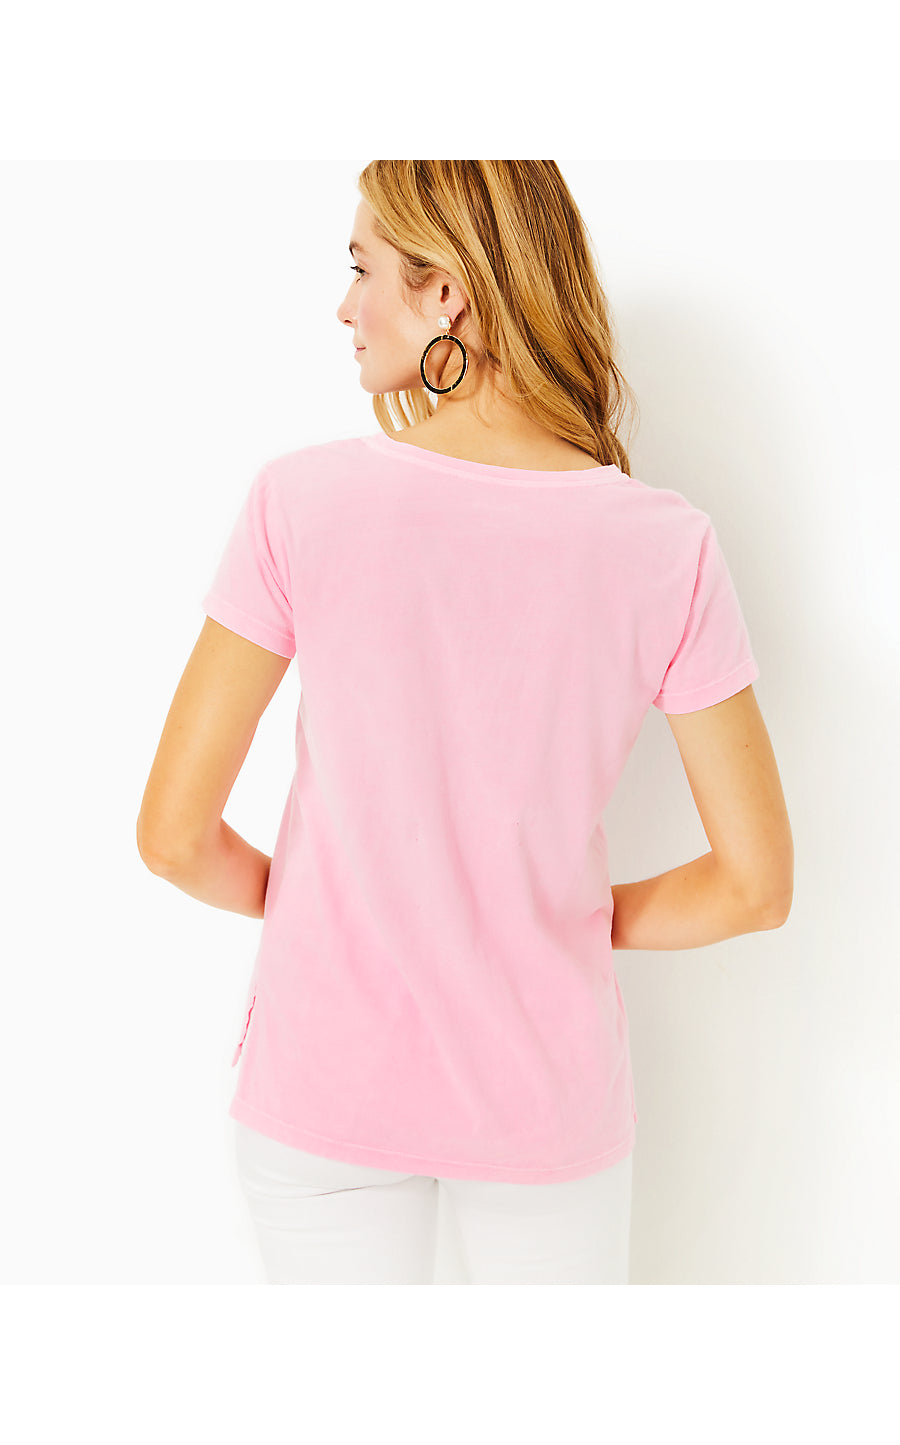 MEREDITH TEE - CONCH SHELL PINK